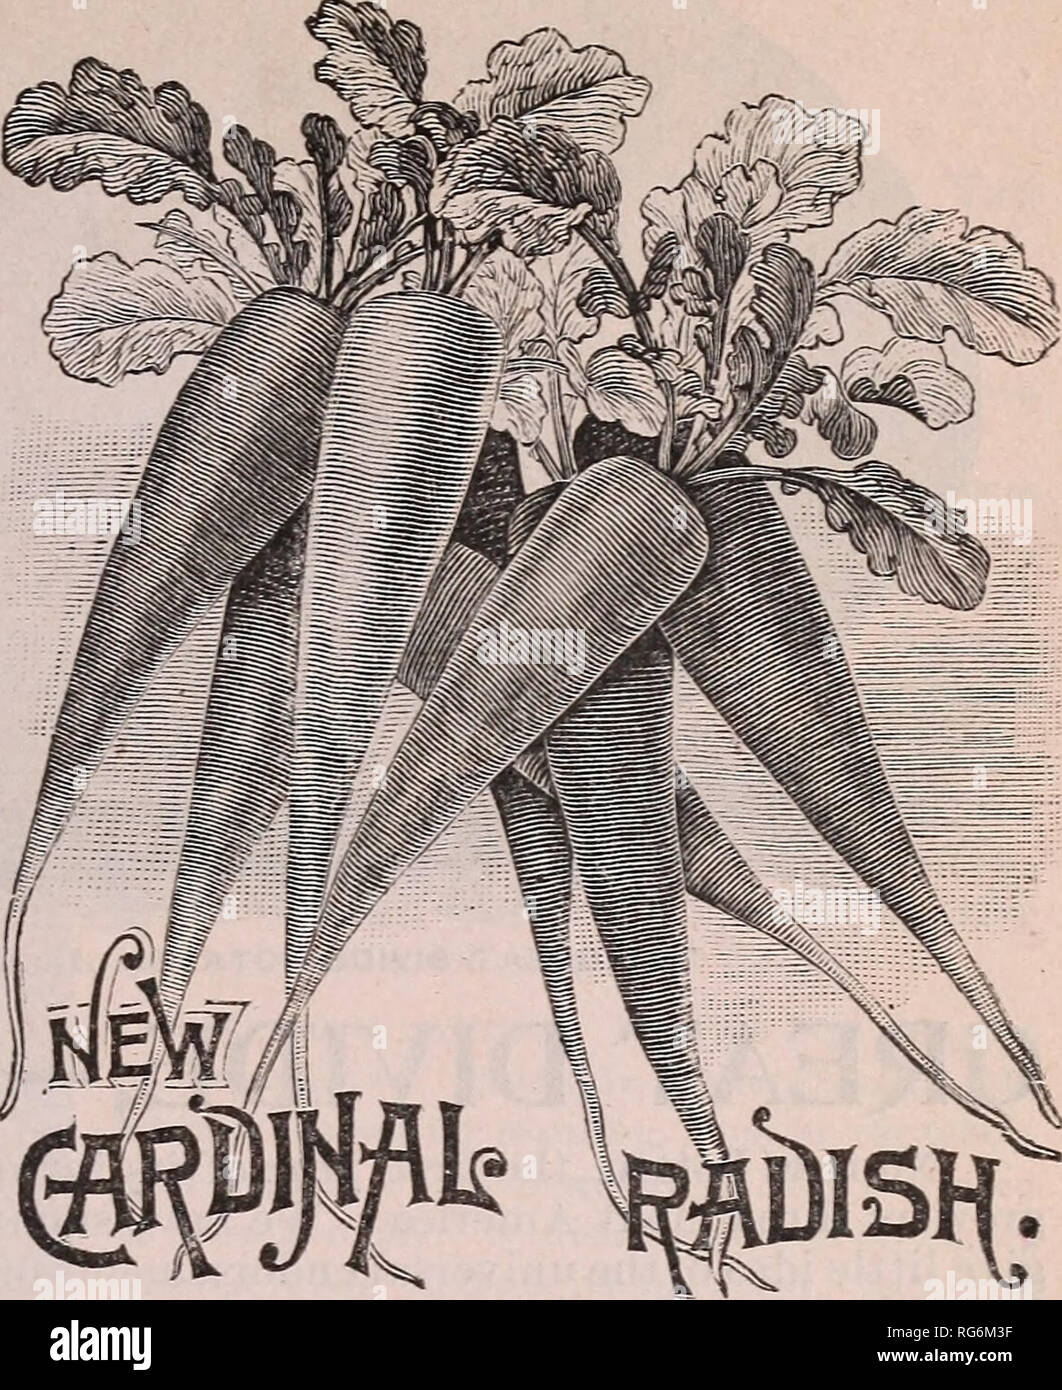 . Burpee's farm annual : the best seeds that grow including rare novelties. Nurseries (Horticulture) Pennsylvania Philadelphia Catalogs; Vegetables Seeds Catalogs; Fruit Catalogs; Plants, Ornamental Catalogs; Flowers Seeds Catalogs. NEW BRIGHT BREAKFAST RADISH. NEW BRIGHT BREAKFAST RADISH. An Improved Type of the French Breakfast. Gardeners generally know what an improvement the Early Round Dark Red Radish is over the old Early Scarlet Turnip, also the Early Oval Dark Red over the old Scarlet Olive-shaped Radish. This variety is a similar improvement over the well- known and justly favorite Fr Stock Photo